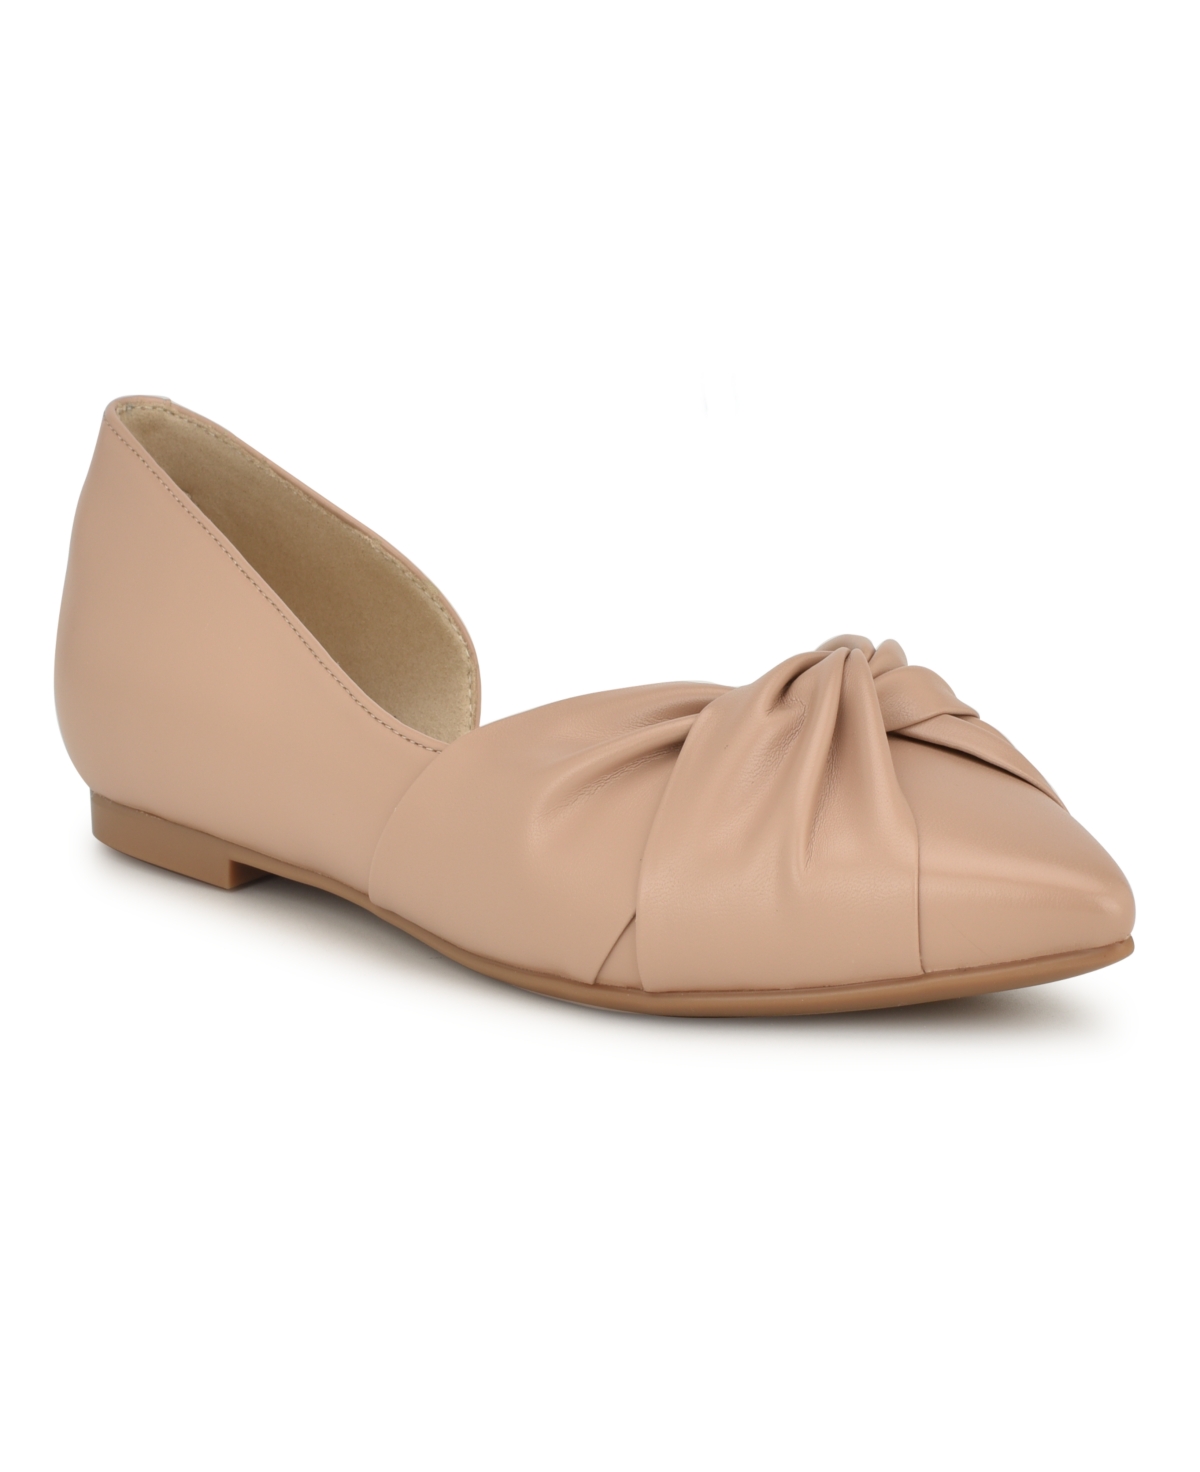 Shop Nine West Women's Briane Slip-on Pointy Toe Dress Flats In Light Natural - Faux Leather